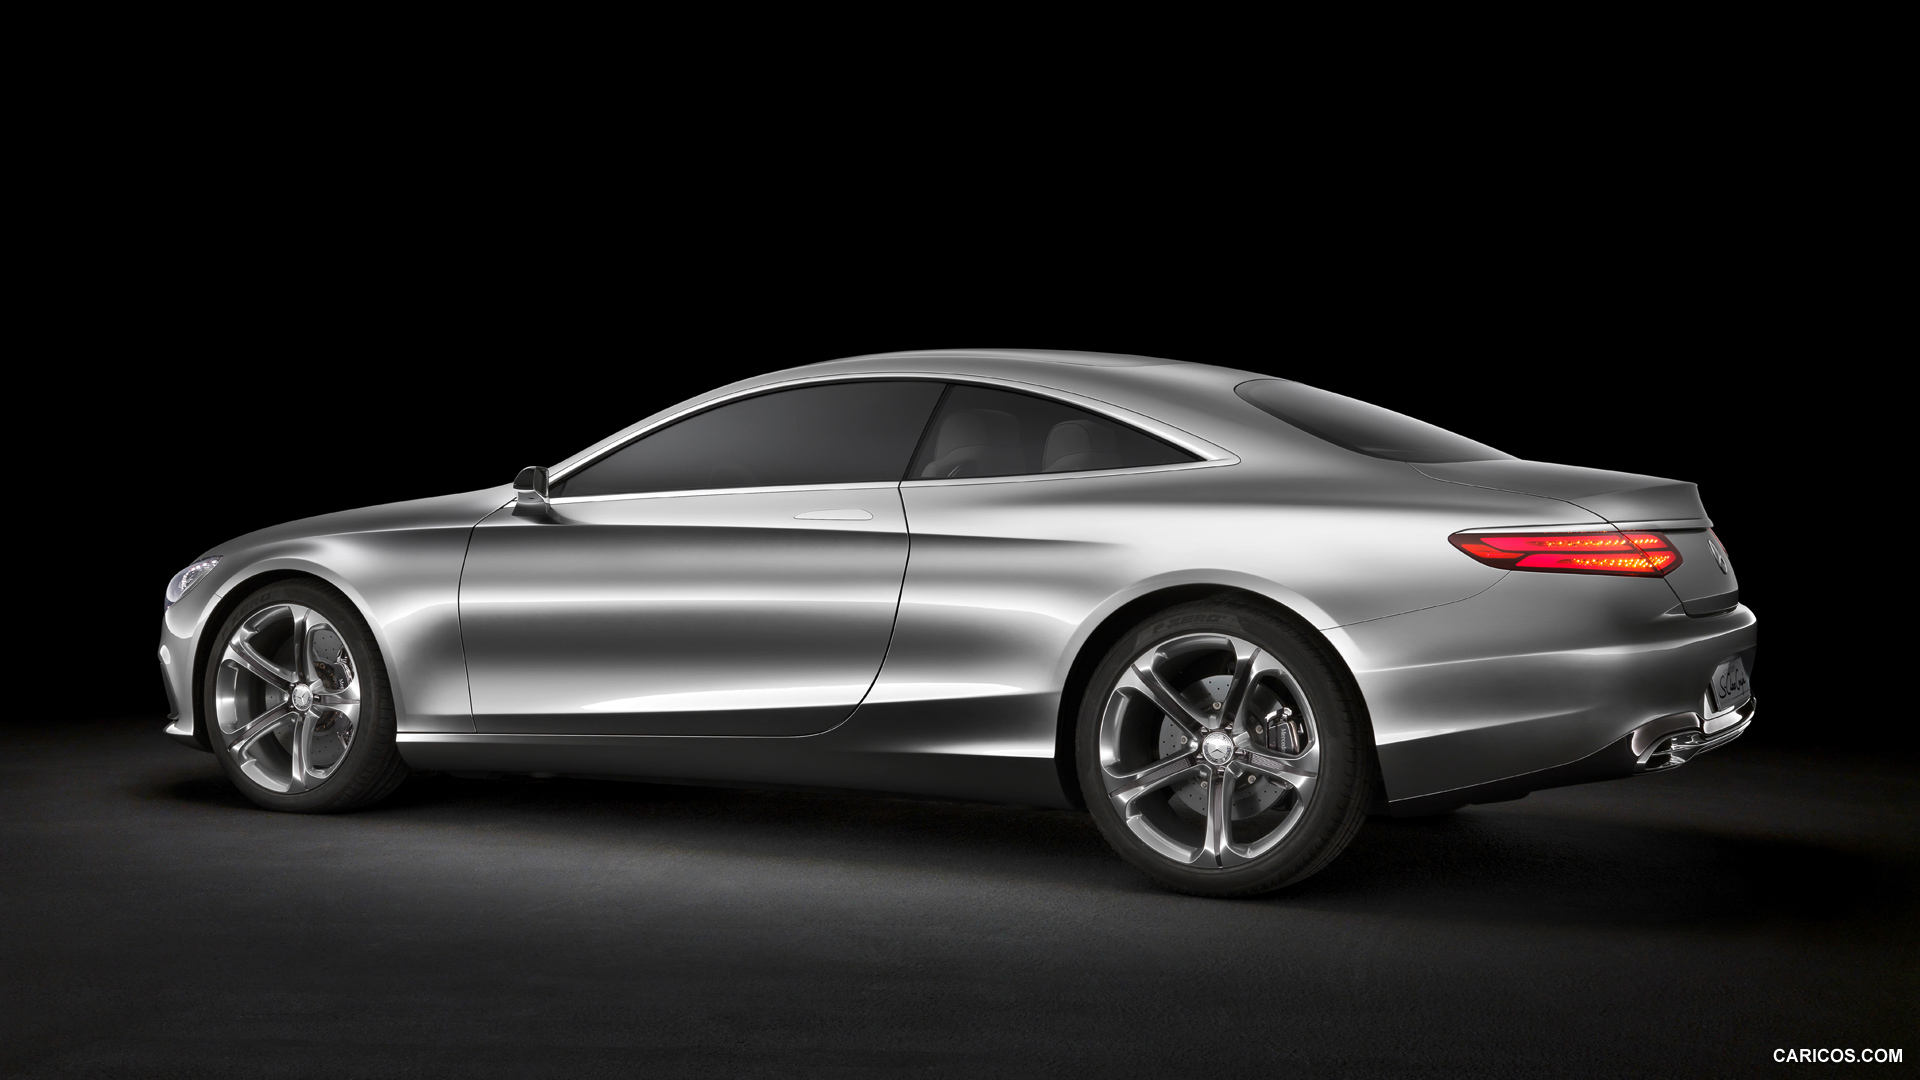 Mercedes-Benz S-Class Coupe Concept (2013)  - Side, #45 of 58